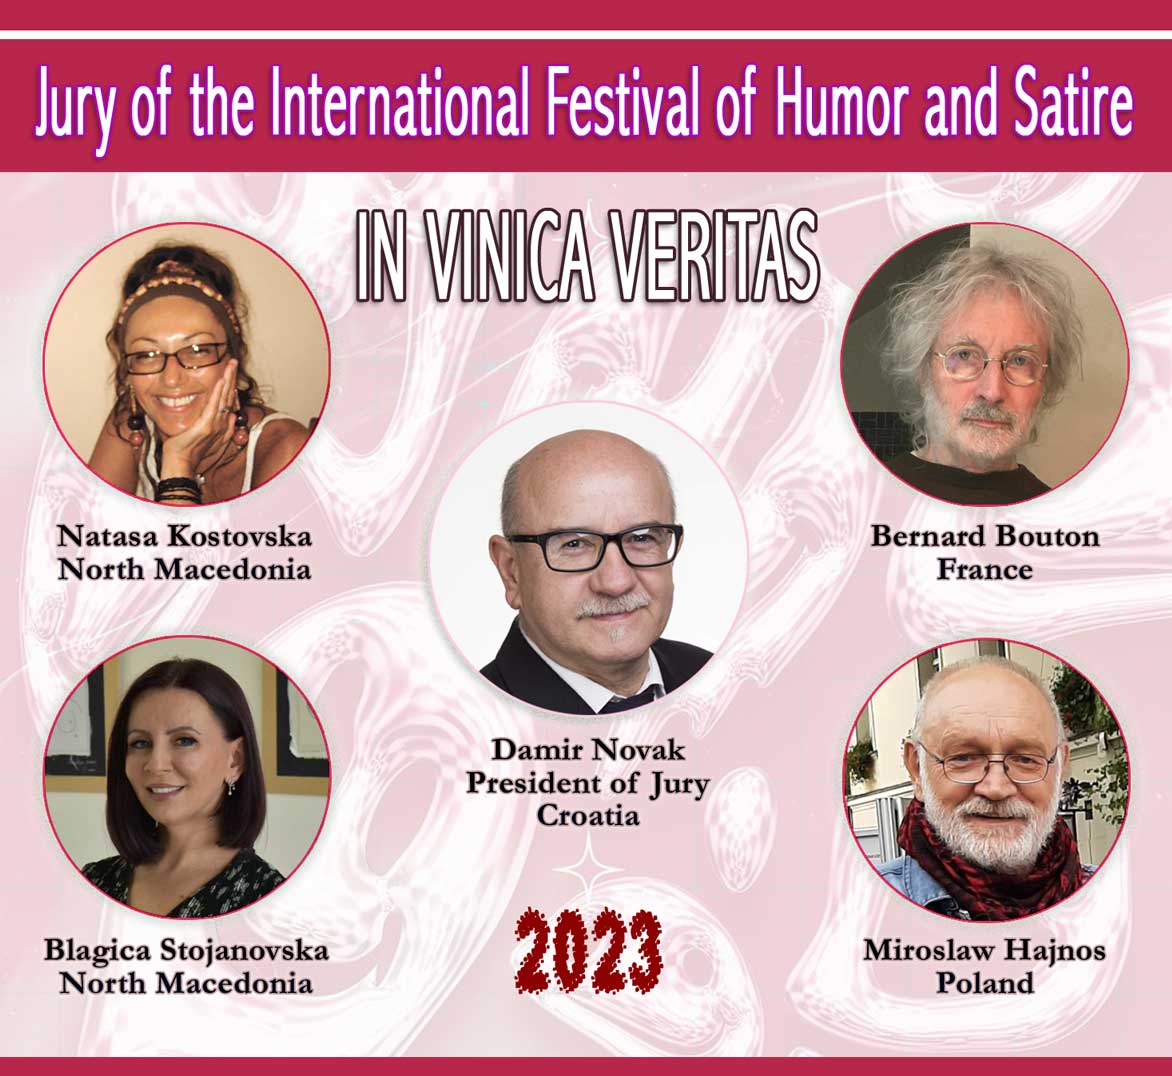 Jury of the International Festival of Humor and Satire in North Macedonia